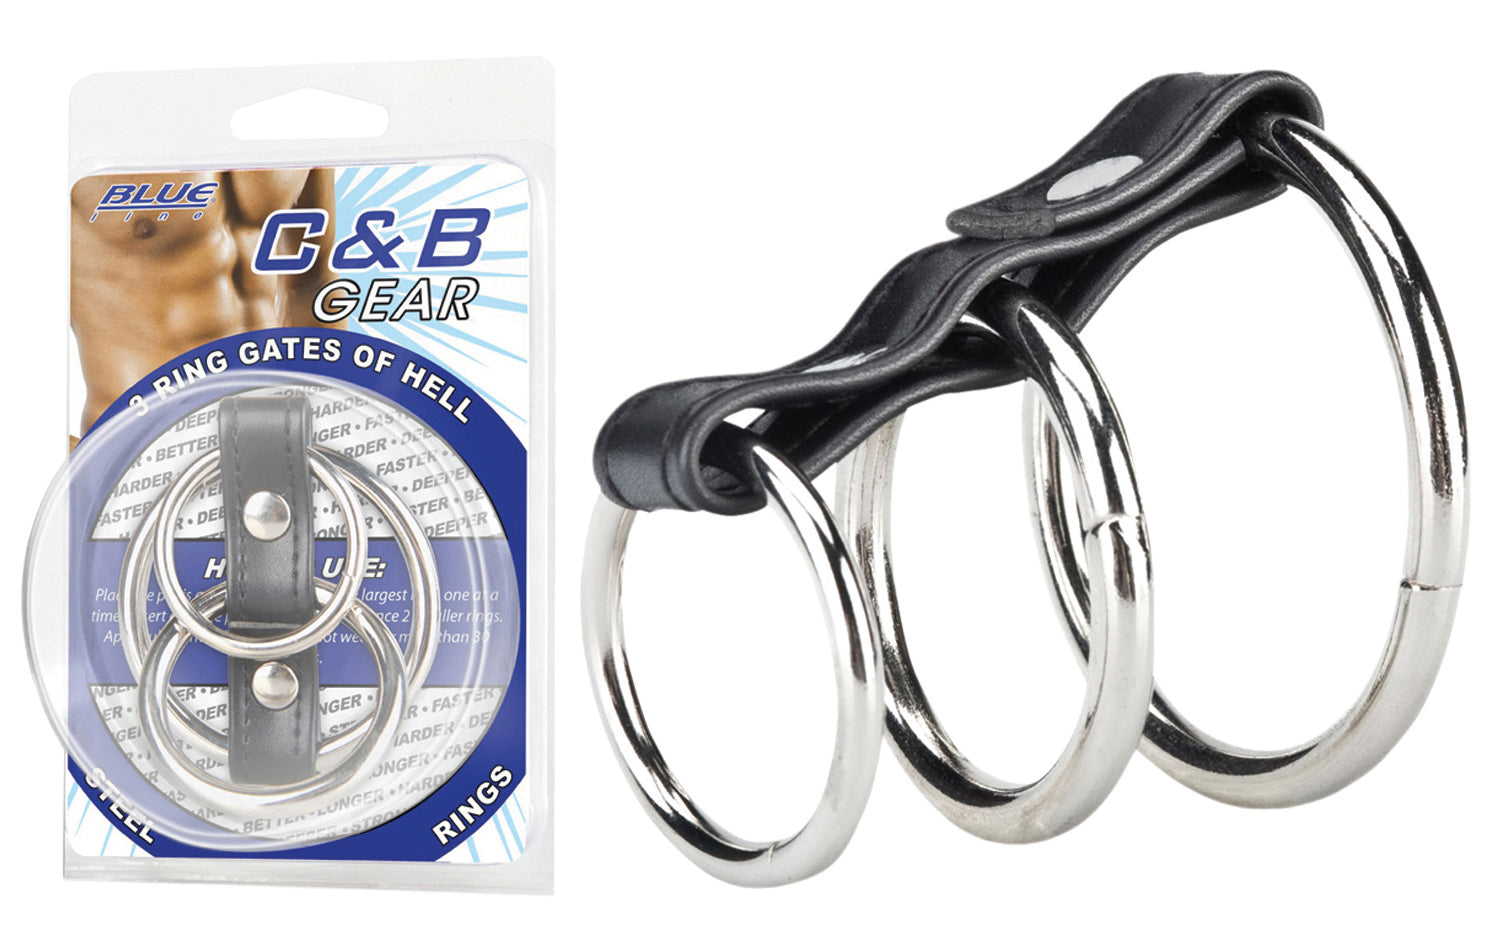 BLUE LINE C&B GEAR 3 Ring Gates Of Hell Metal Cock Ring